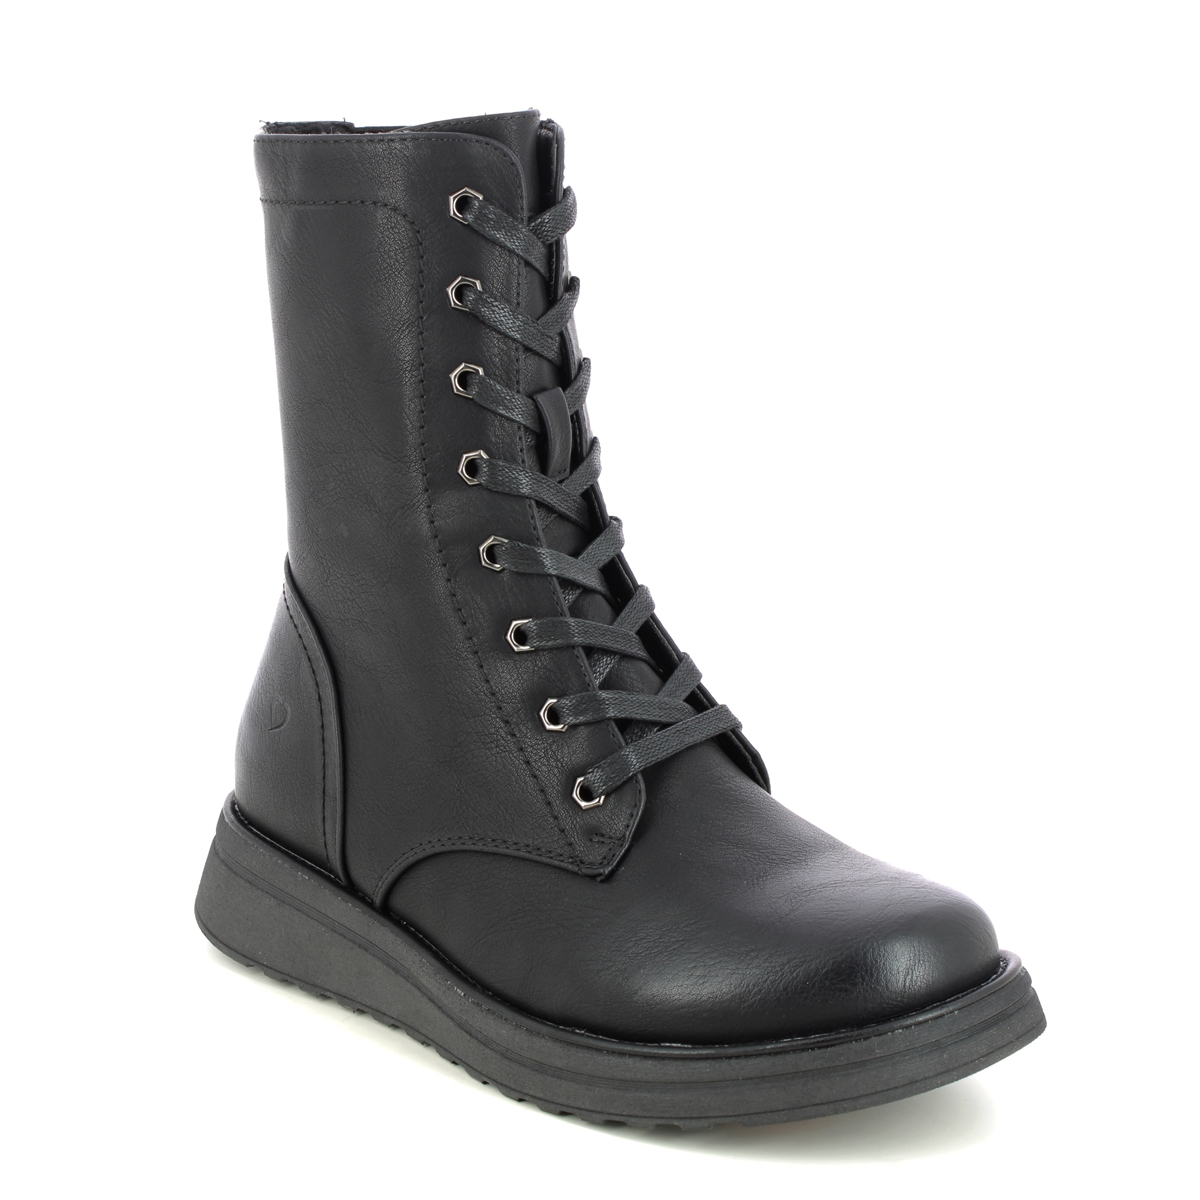 Heavenly Feet Martina Walker Black Womens Lace Up Boots 3509-34 In Size 3 In Plain Black